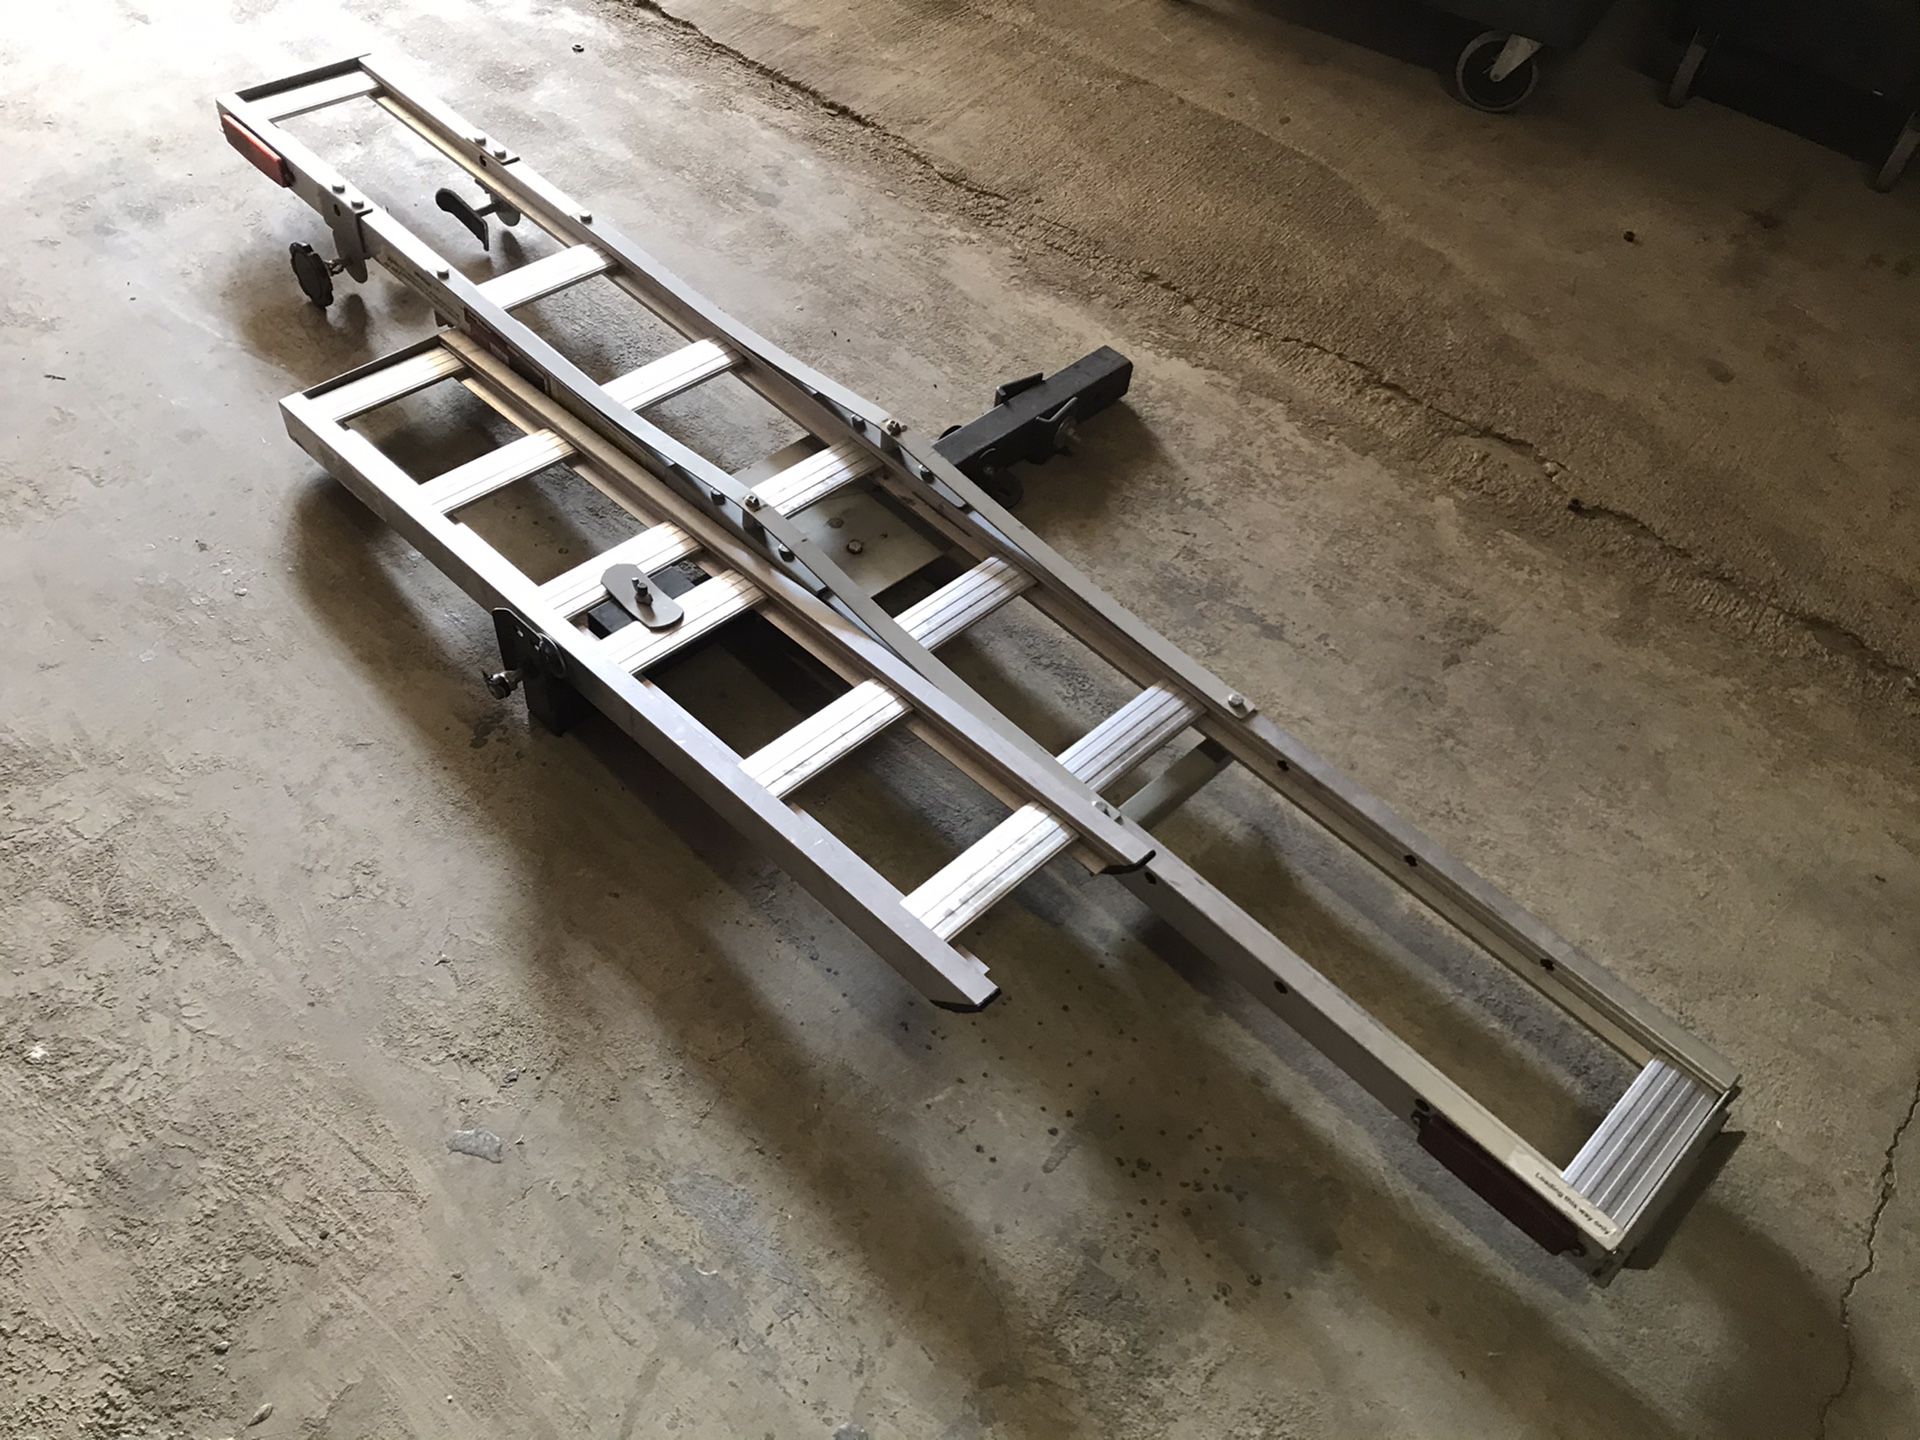 Haul Master Dirtbike Carrier Hitch